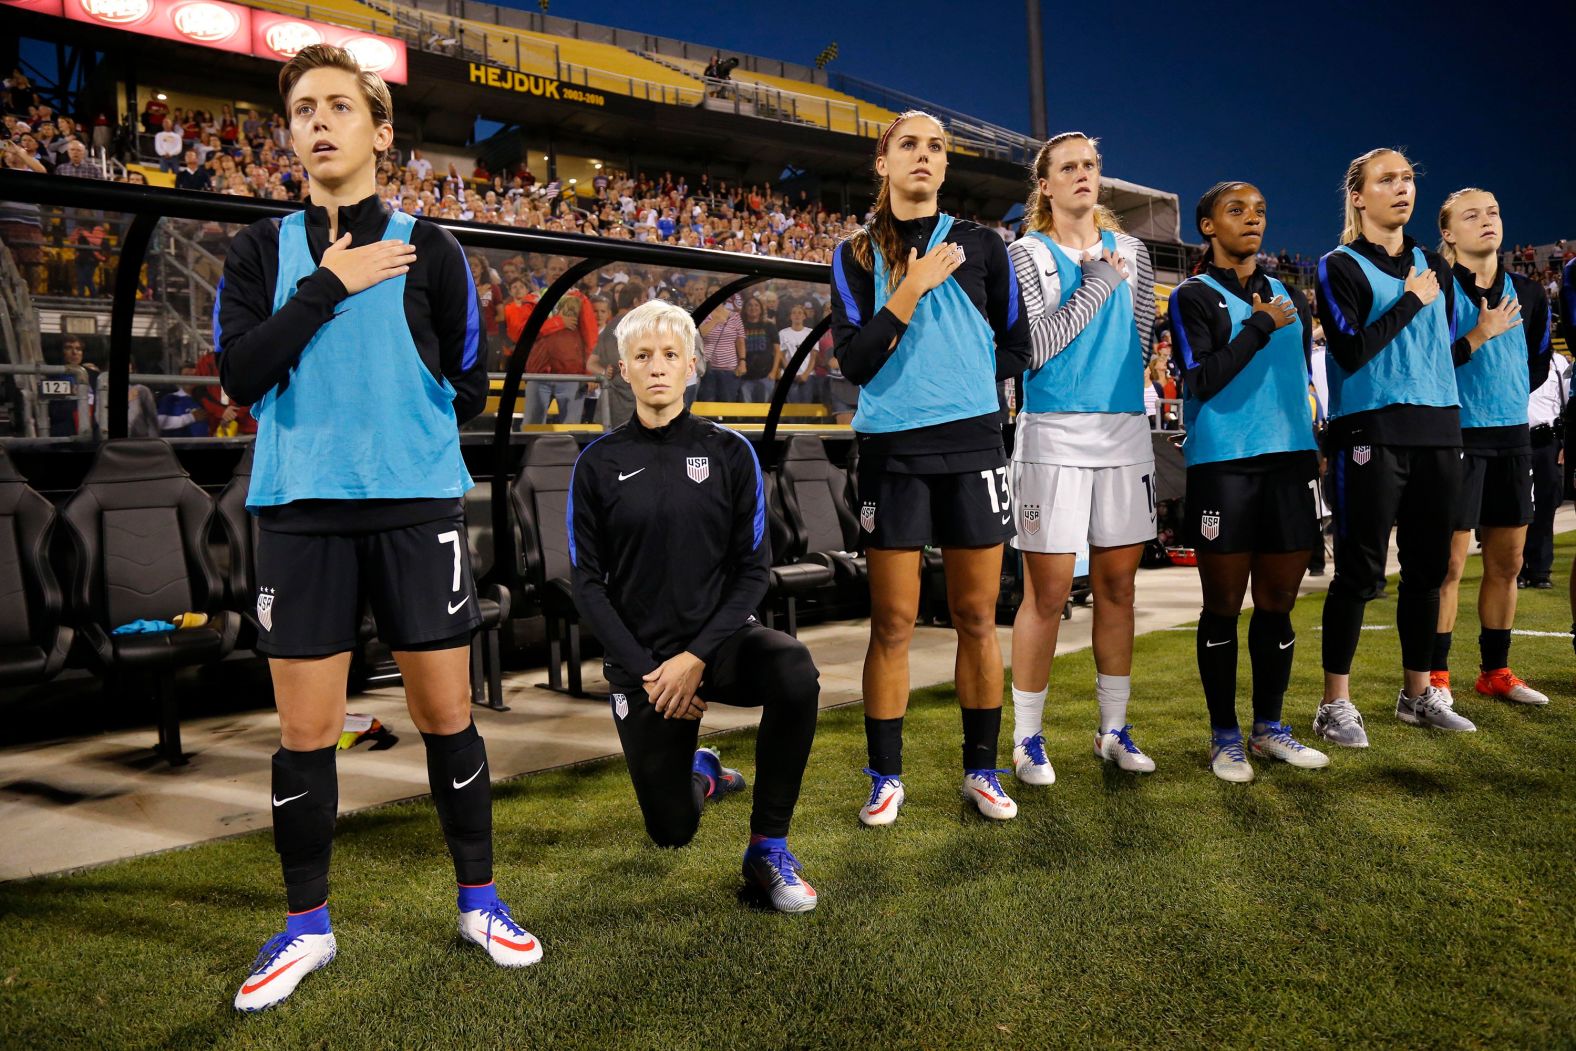 Rapinoe kneels during the National Anthem before a match against Thailand in Columbus, Ohio, in 2016. She was <a href="index.php?page=&url=https%3A%2F%2Fbleacherreport.com%2Farticles%2F2663982-megan-rapinoe-kneels-during-national-anthem-before-usa-vs-thailand" target="_blank" target="_blank">protesting racial injustice</a> in solidarity with San Francisco 49ers quarterback Colin Kaepernick.